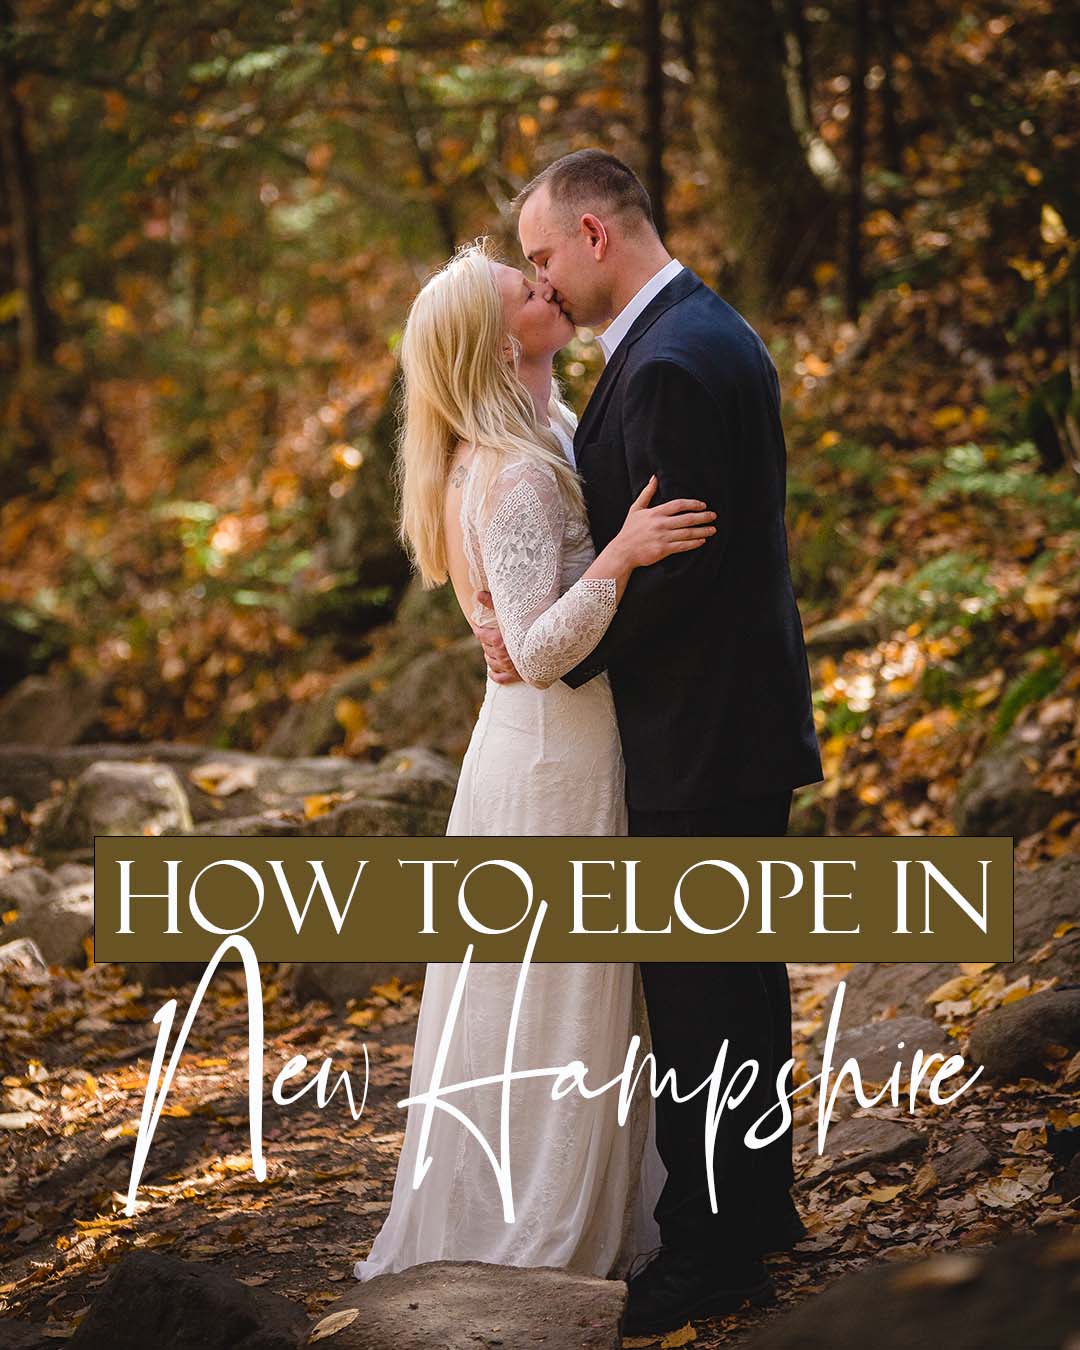 Elope NH 3 8x10 1 If you're reading this post, it's probably because you're engaged, planning your wedding and wondering what the cost of elopements are compared to the 100+ person wedding you might have started planning. Or maybe you always knew you wanted to elope or keep your wedding small but you're wondering why it feels so expensive. This post is packed with helpful insight on determining a budget with some real case studies of budgets from my actual couples.